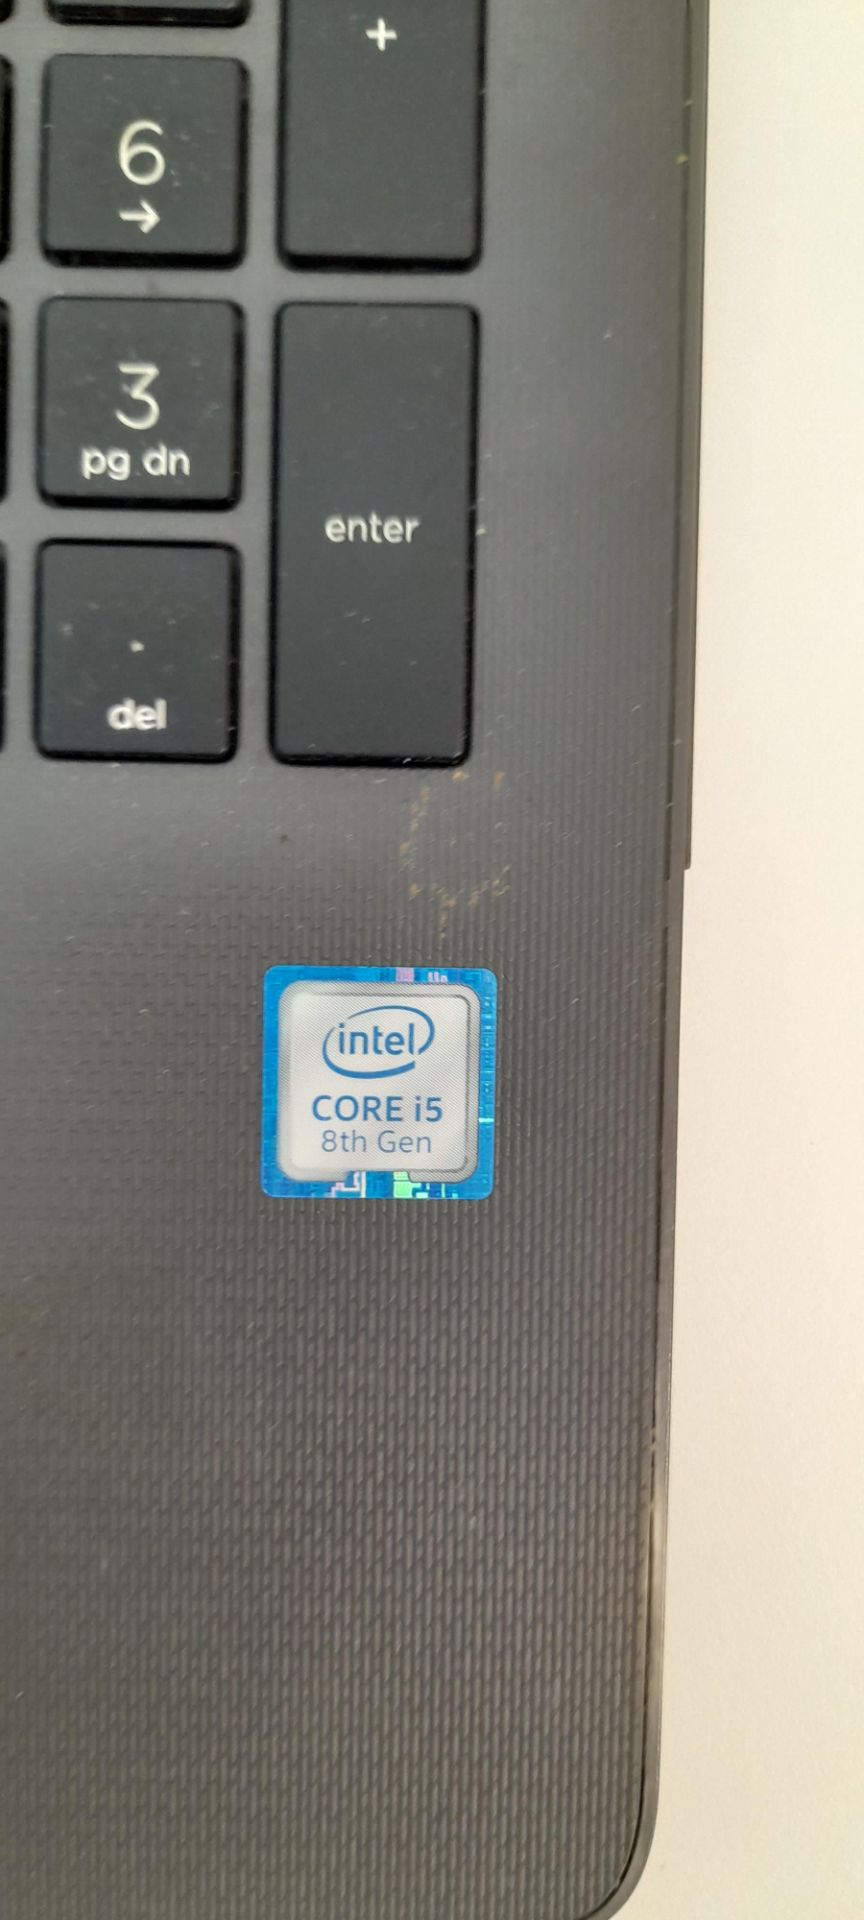 2x HP G250 G7 laptop with intel Core i5, 8th Gen. Collection from Canary Wharf, London, E14 - Image 12 of 15